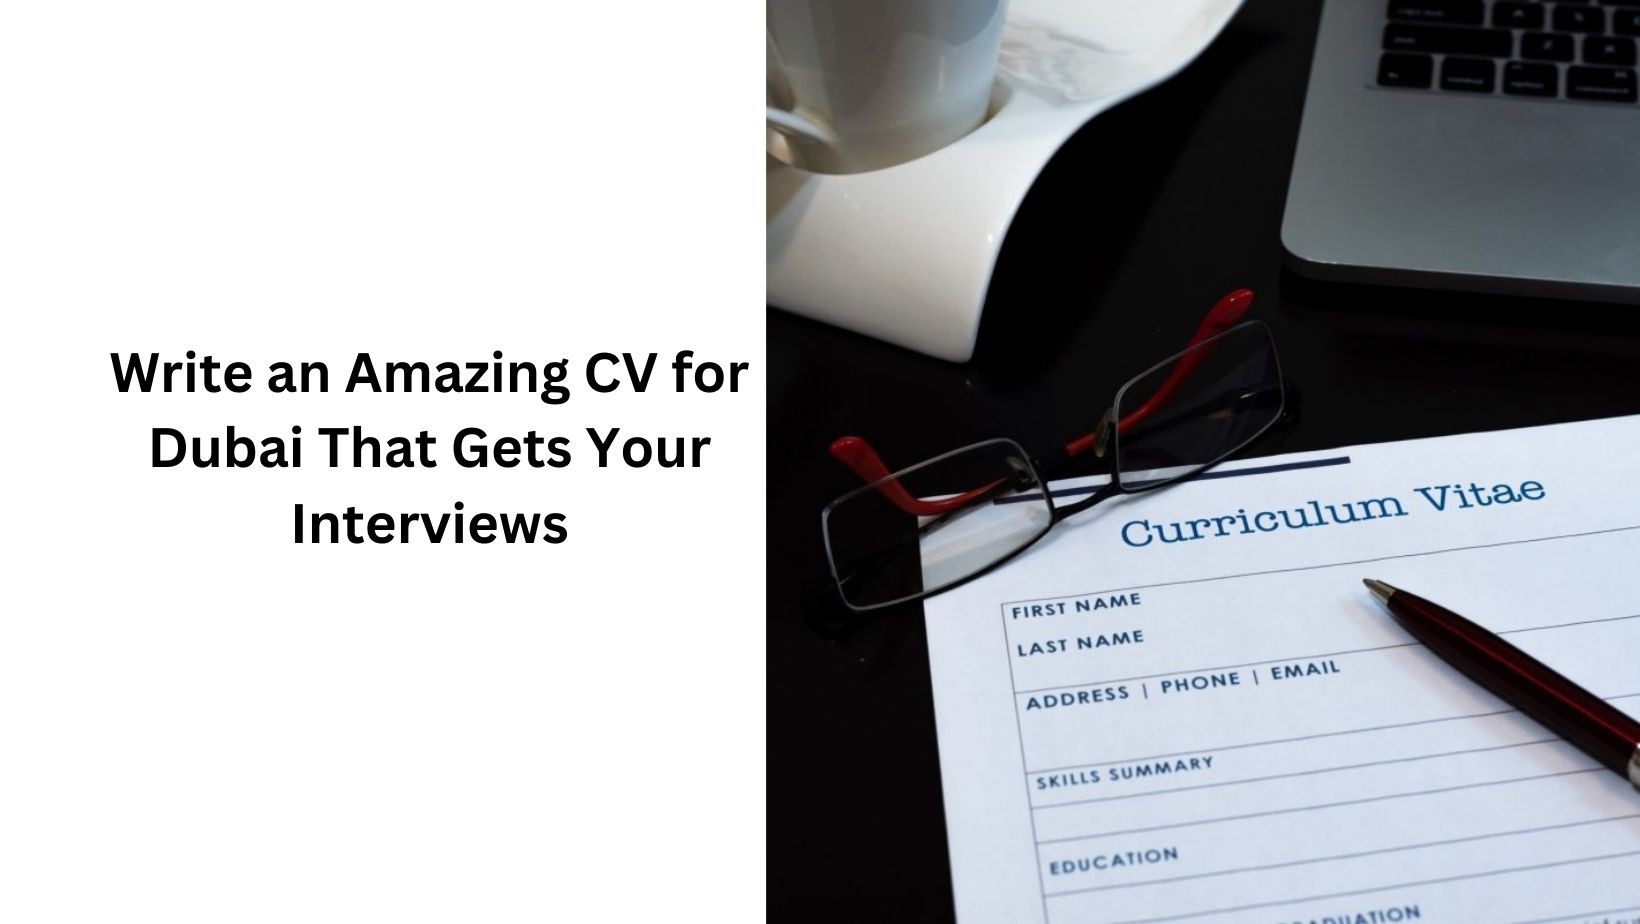 Write an Amazing CV for Dubai That Gets Your Interviews